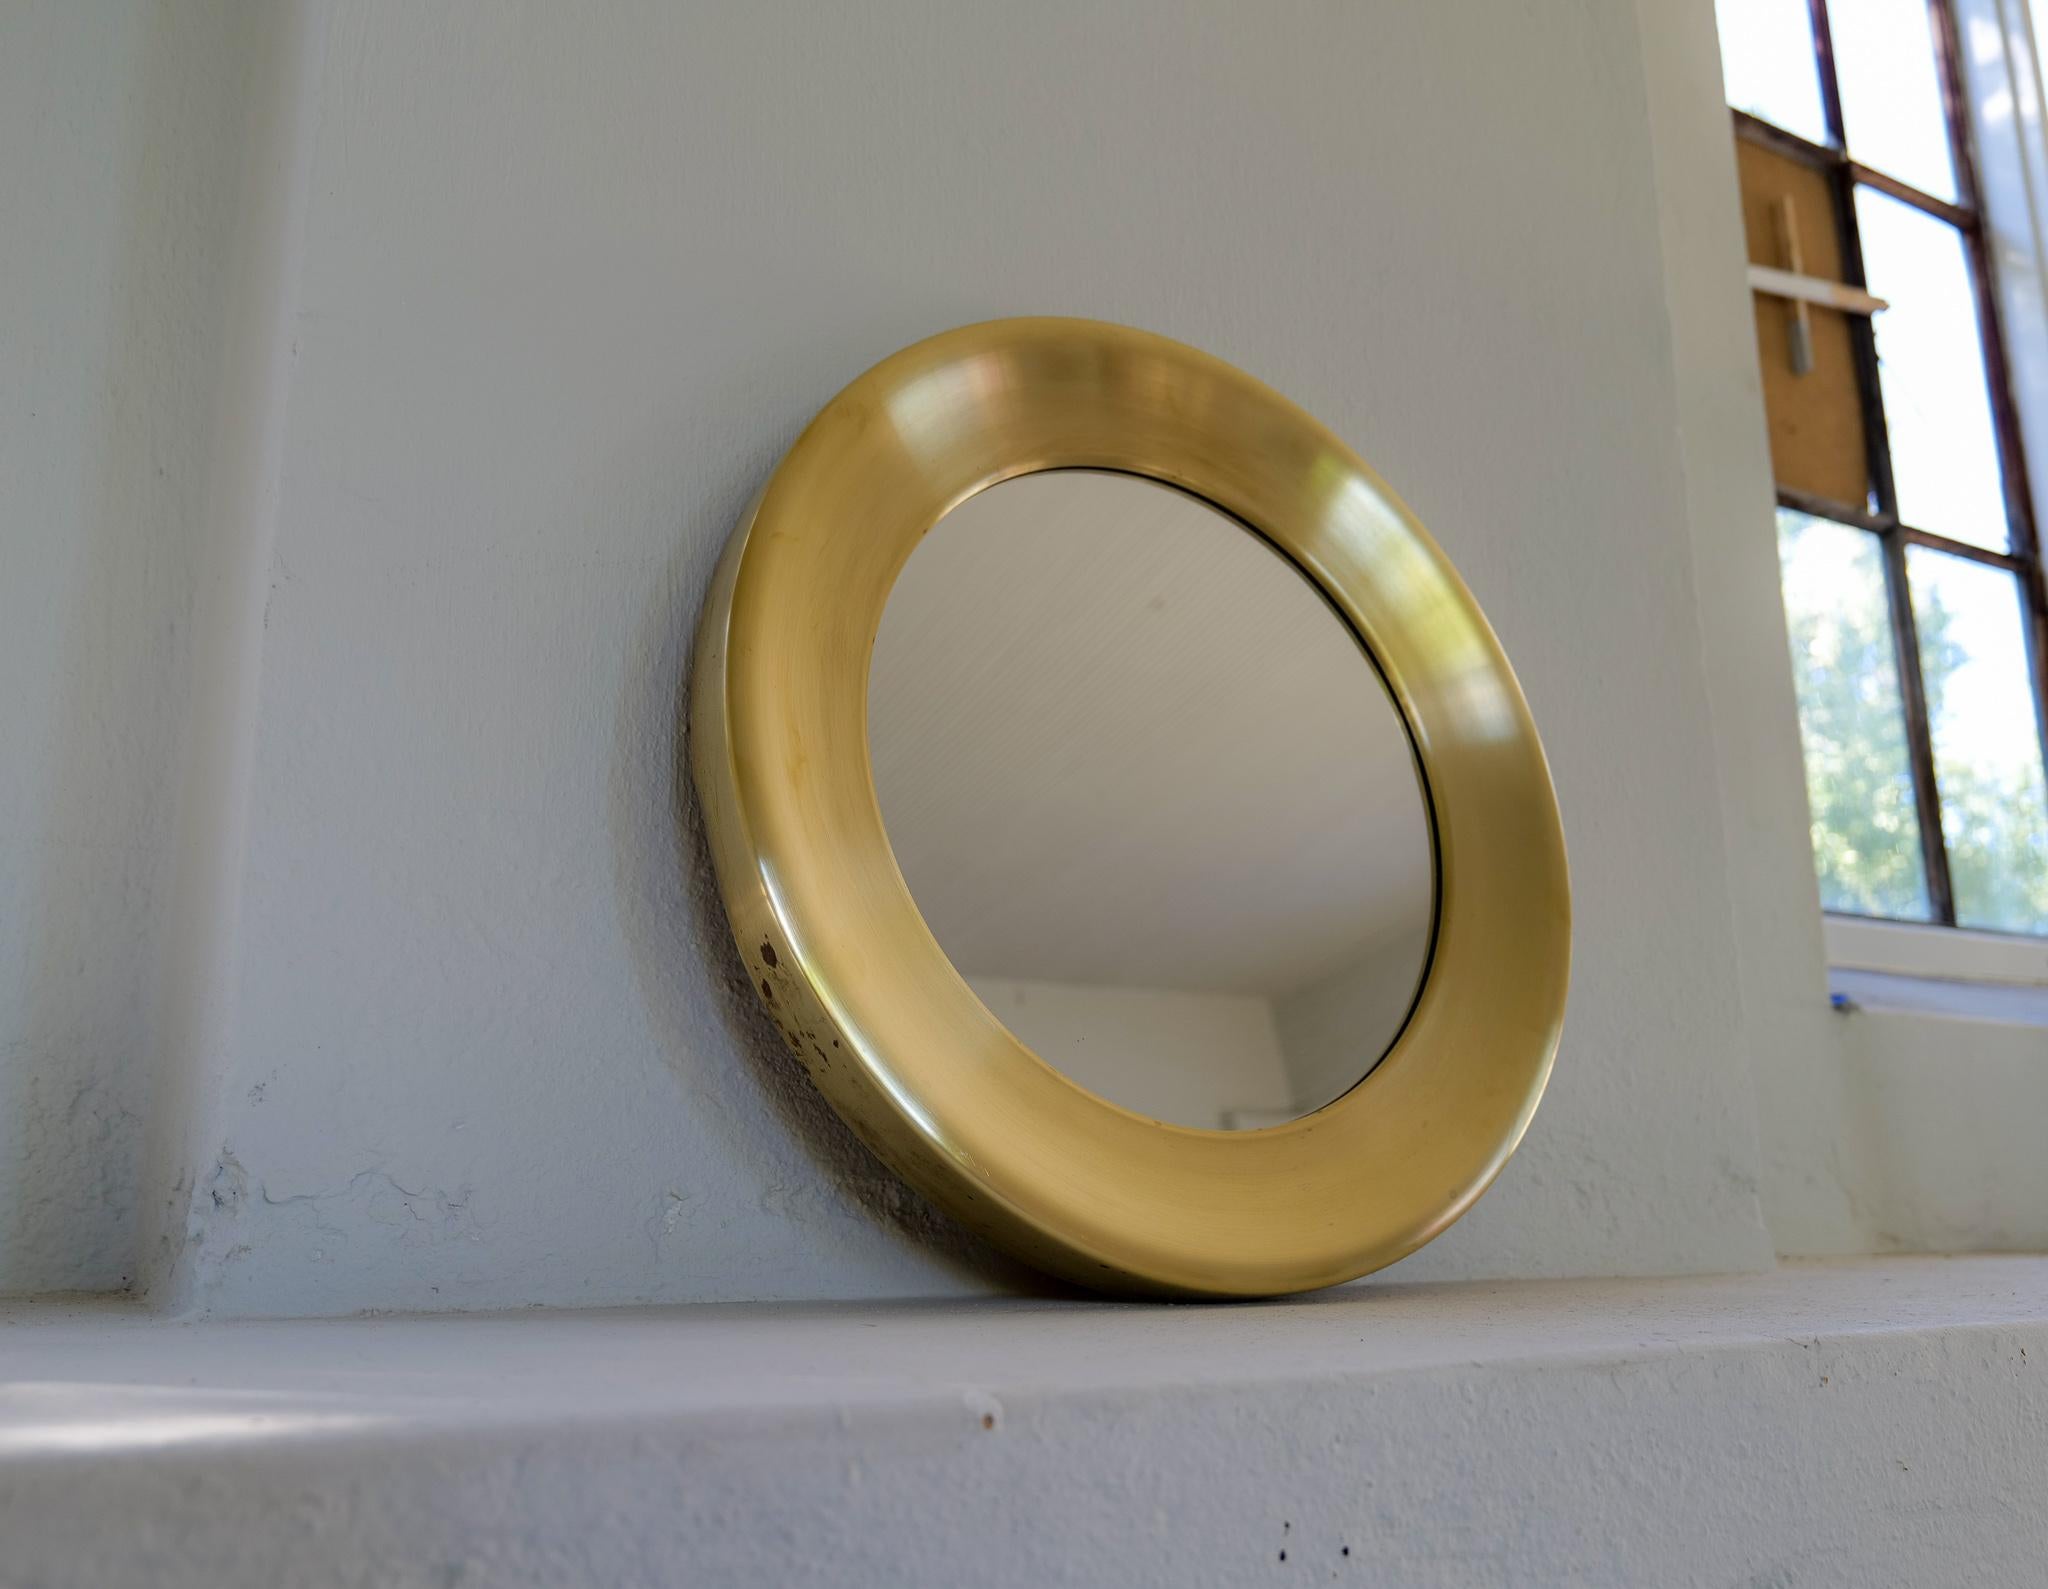 Mid-20th Century Midcentury Modern Rounded Brass Mirror by Glasmäster in Markaryd, Sweden, 1960s For Sale